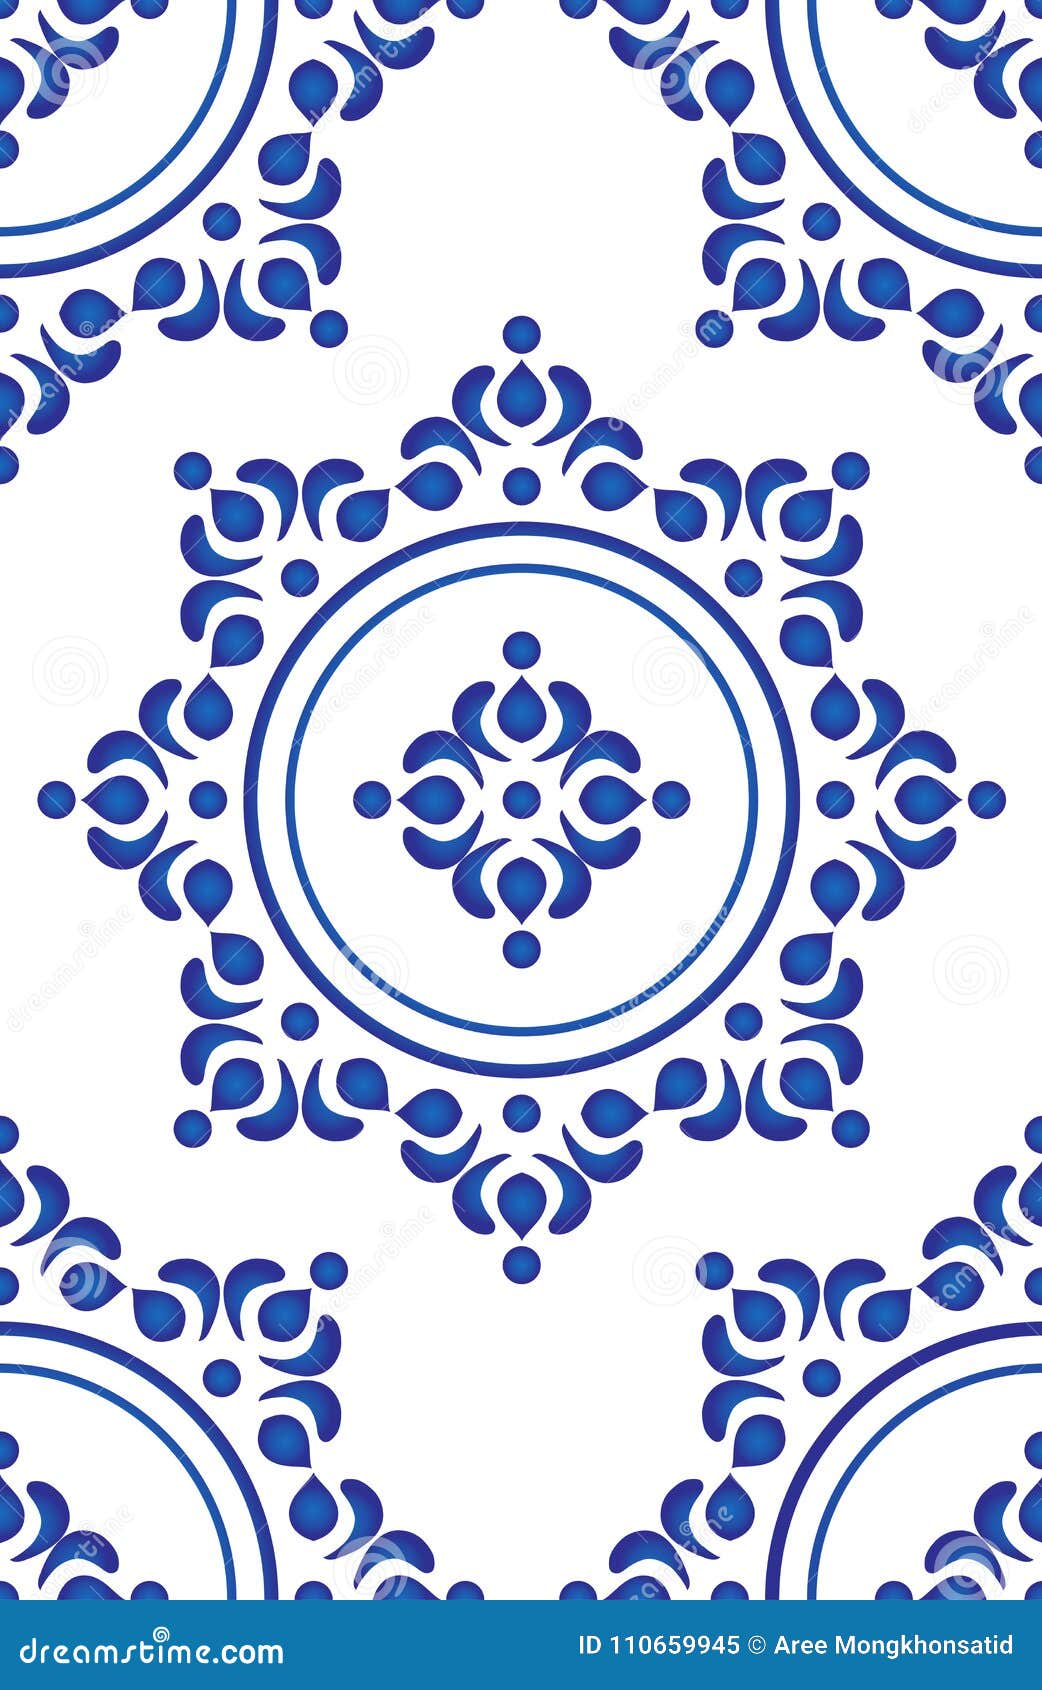 Blue tile pattern vector stock vector. Illustration of moroccan - 110659945